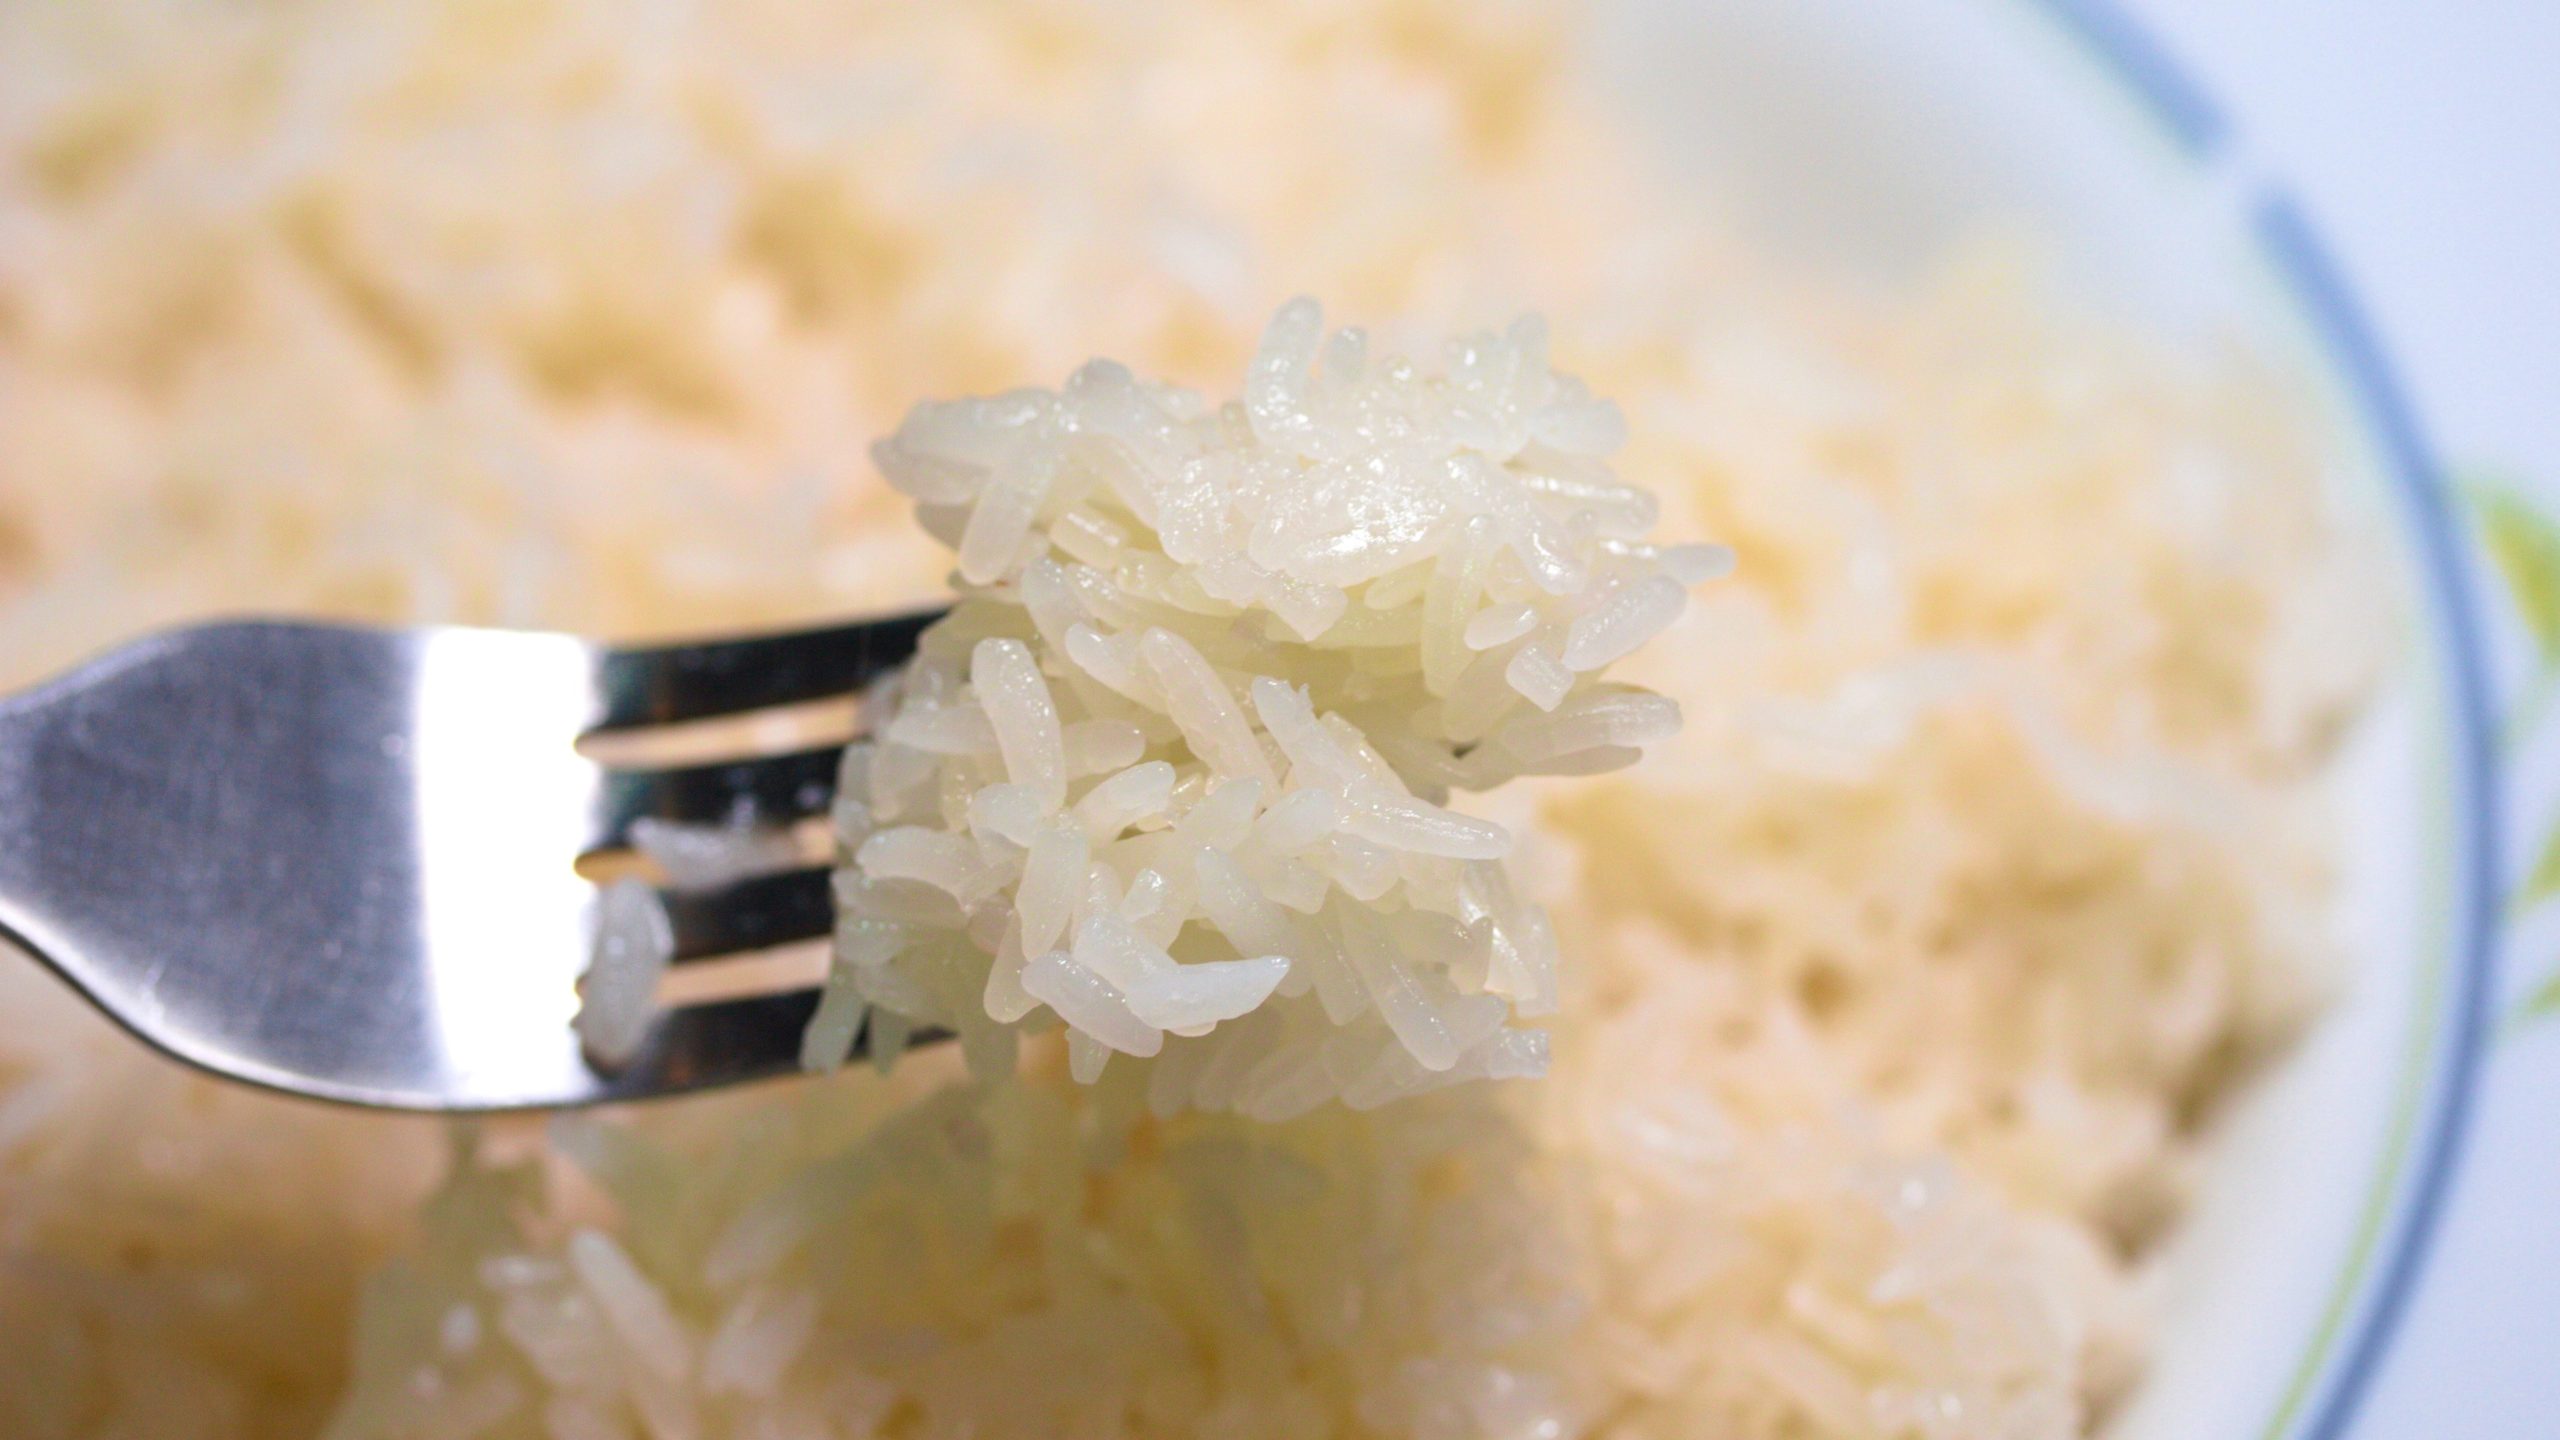 How to Cook the Sticky Rice in Rice Cooker, How to Make Sticky Rice Fast